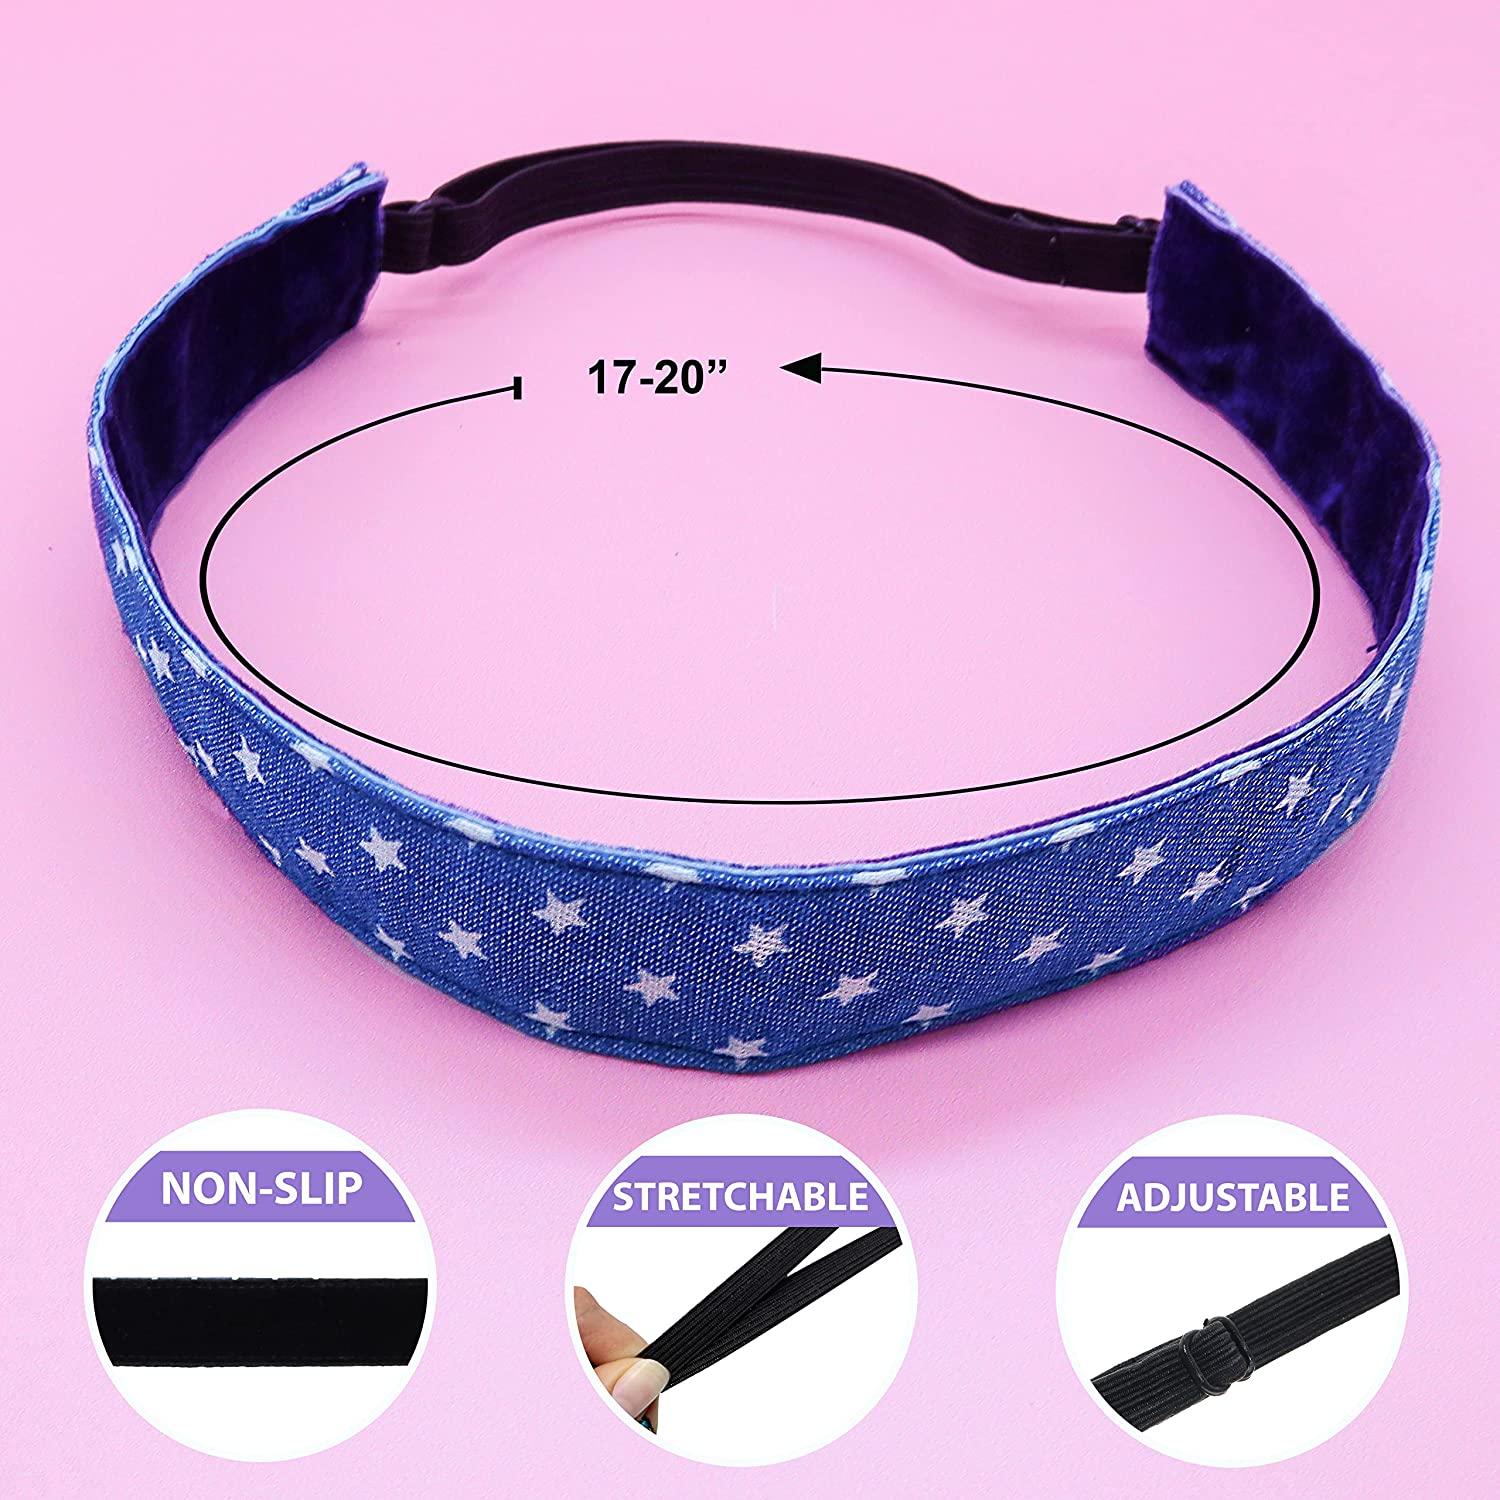 FROG SAC 5 Sports Headbands for Girls, Thin Elastic Sport Hair Bands for  Women, Non Slip Athletic Headband Pack for Kids, Hair Accessories for  Soccer